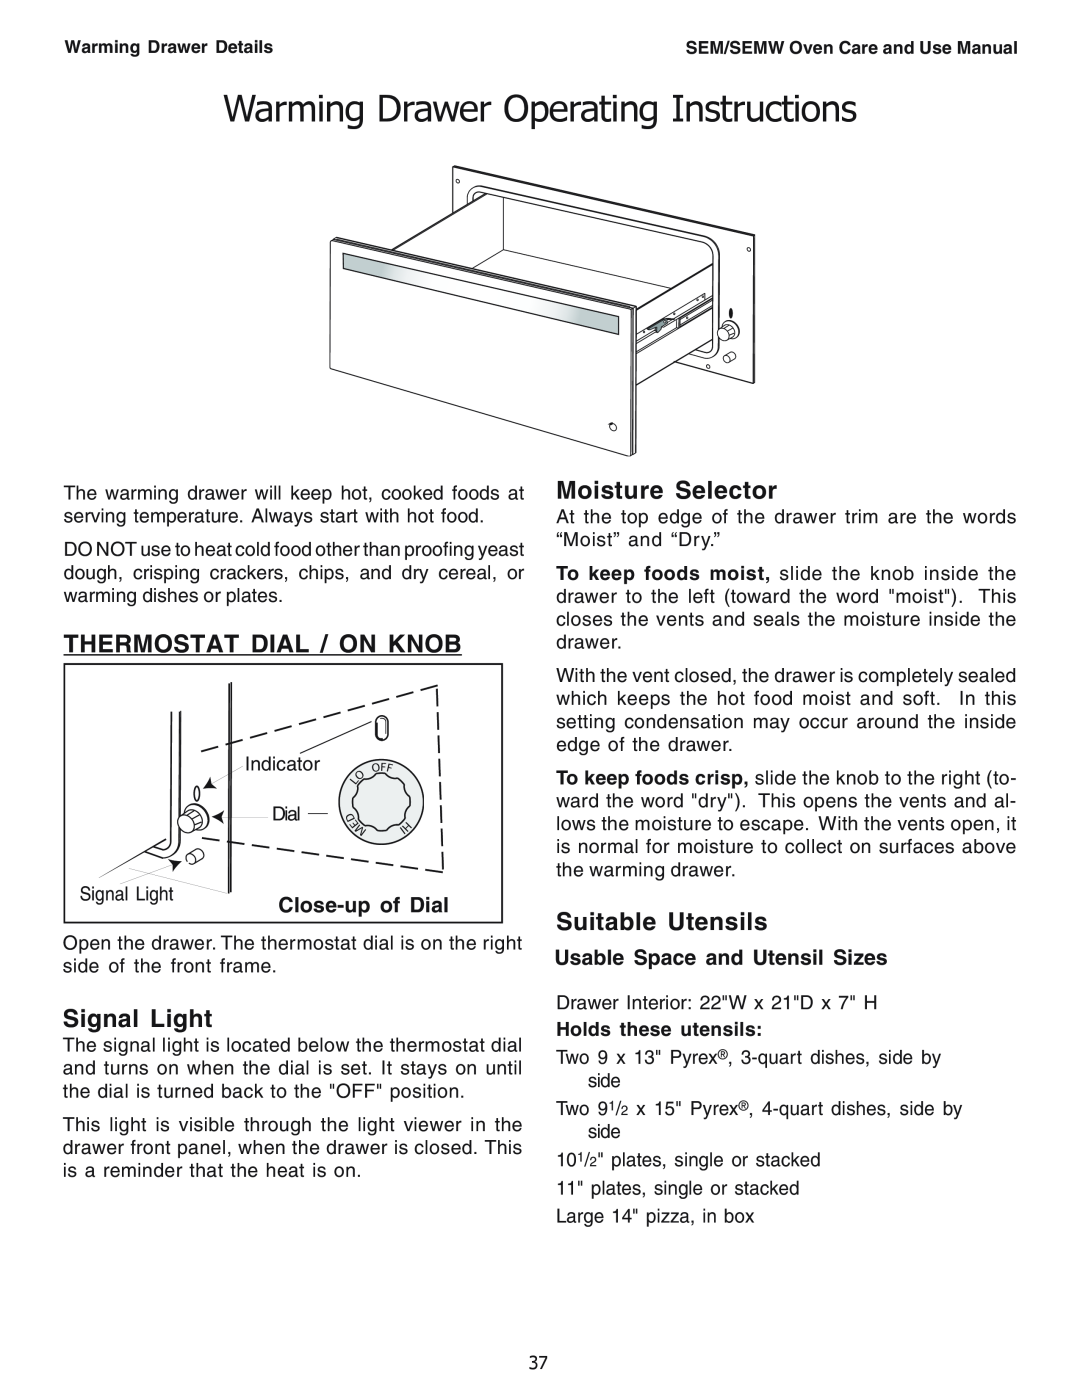 Thermador SEM302, SEM272 Warming Drawer Operating Instructions, Thermostat Dial / On Knob, Signal Light, Moisture Selector 